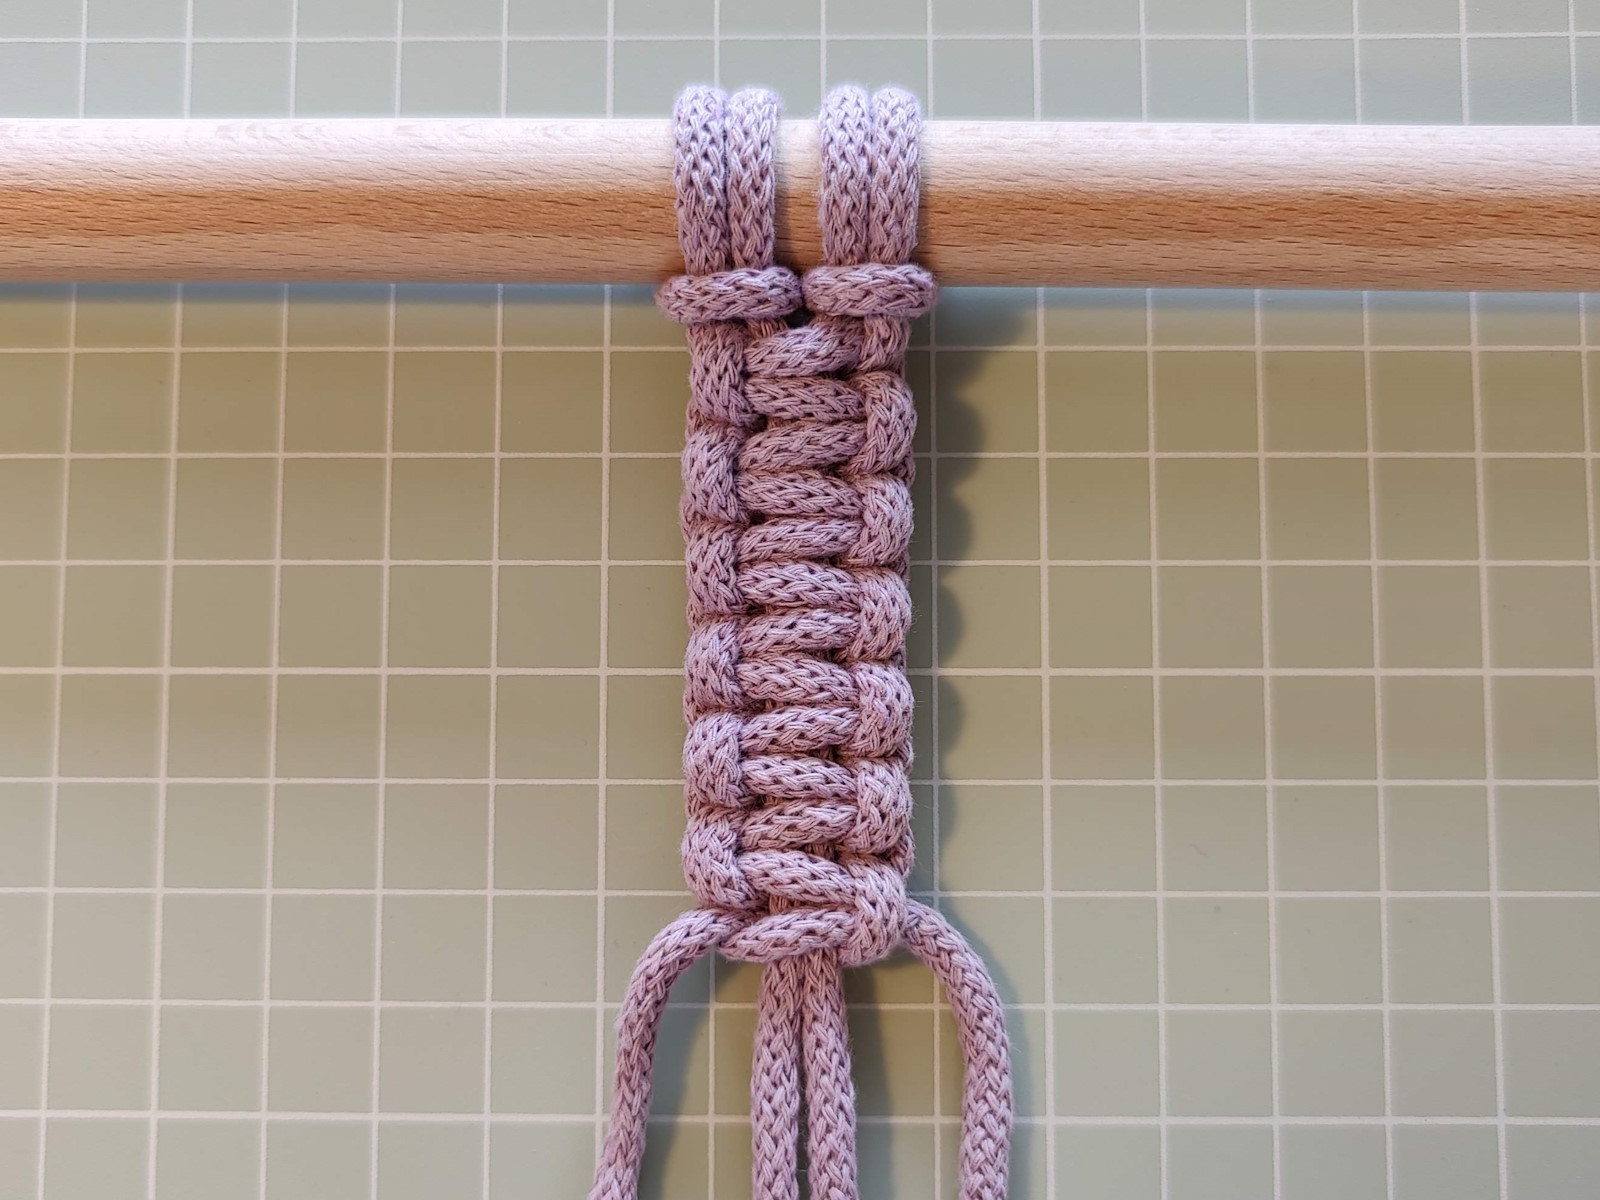 Series of macrame square knots